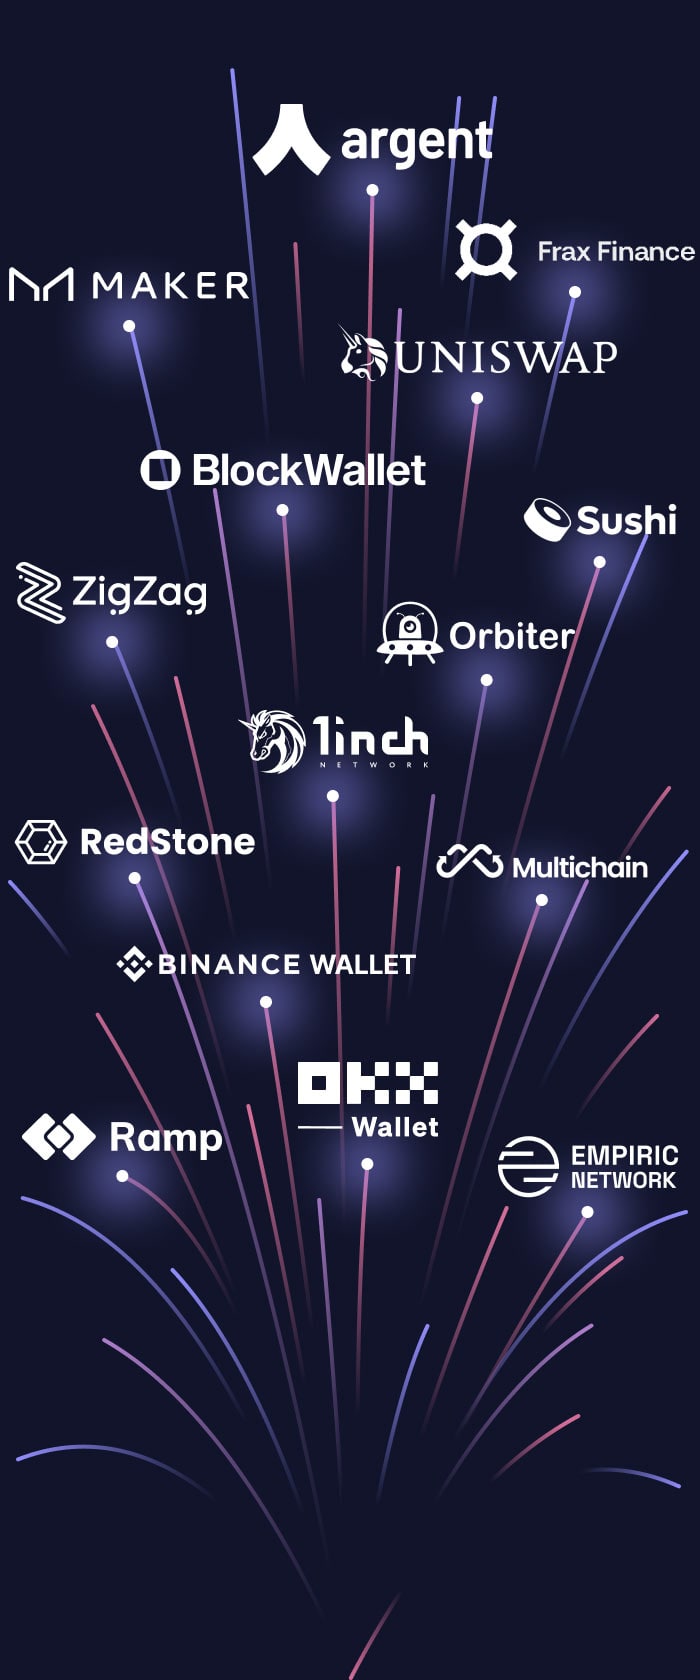 zkSync v2 Mainnet - Largest simultaneous launch in the history of Crypto